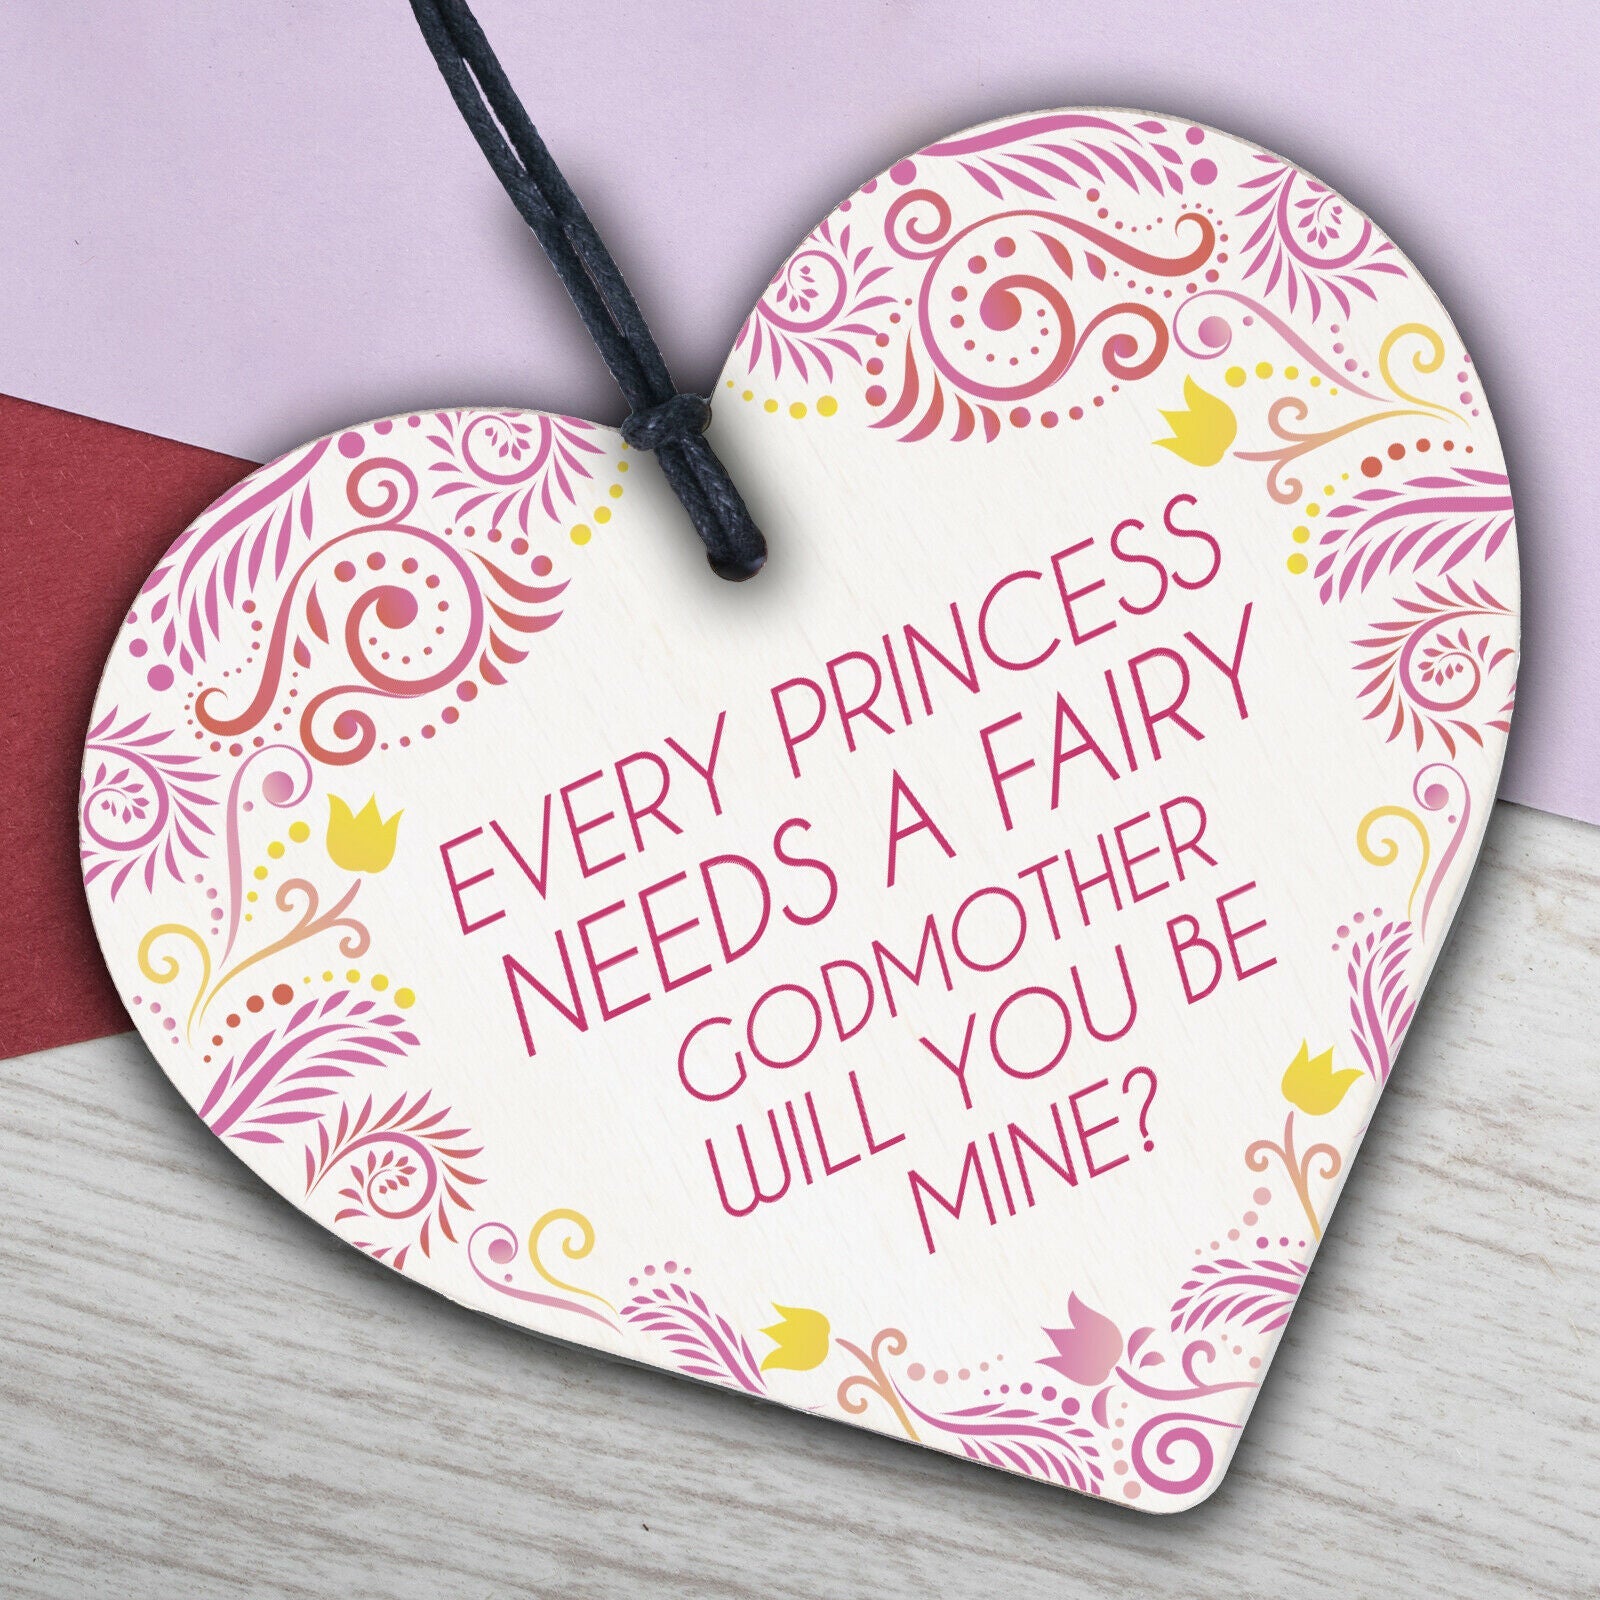 Will You Be My Godmother Fairy Wooden Heart Godparents Family Friendship Gifts